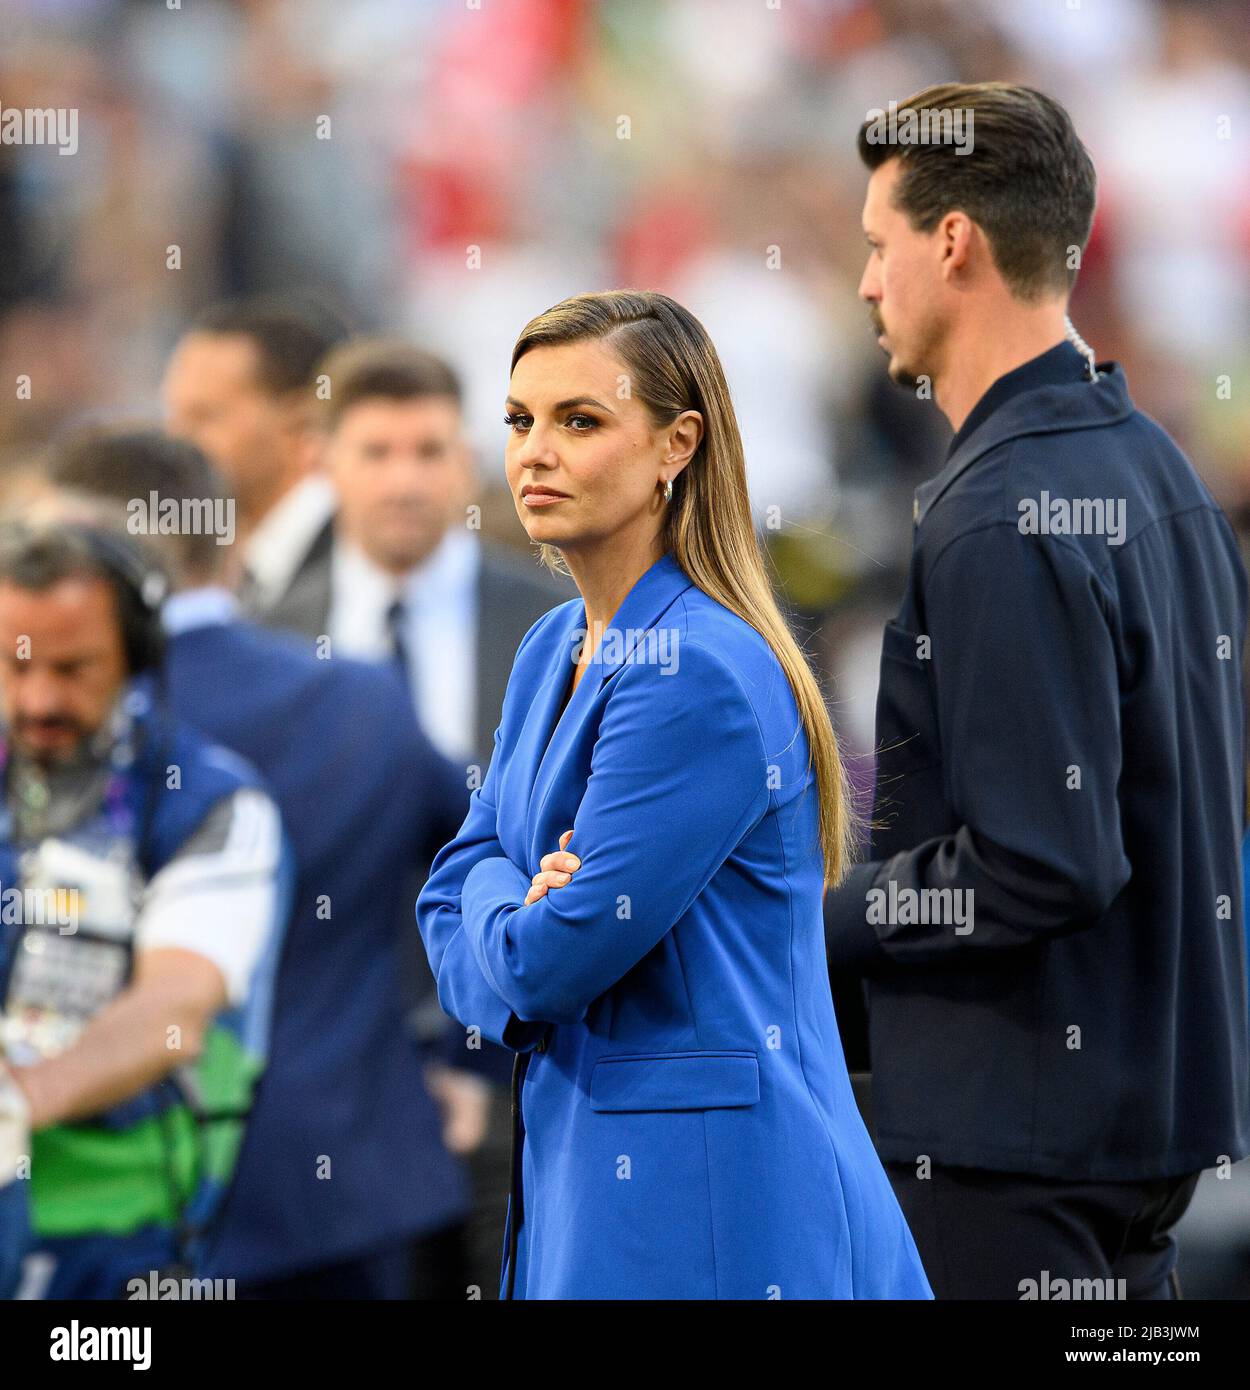 Presenter Laura WONTORRA (DAZN) behind TV expert Sandro WAGNER Soccer Champions League Final 2022, Liverpool FC (LFC) - Real Madrid (Real) 0 1, on May 28th, 2022 in Paris/France